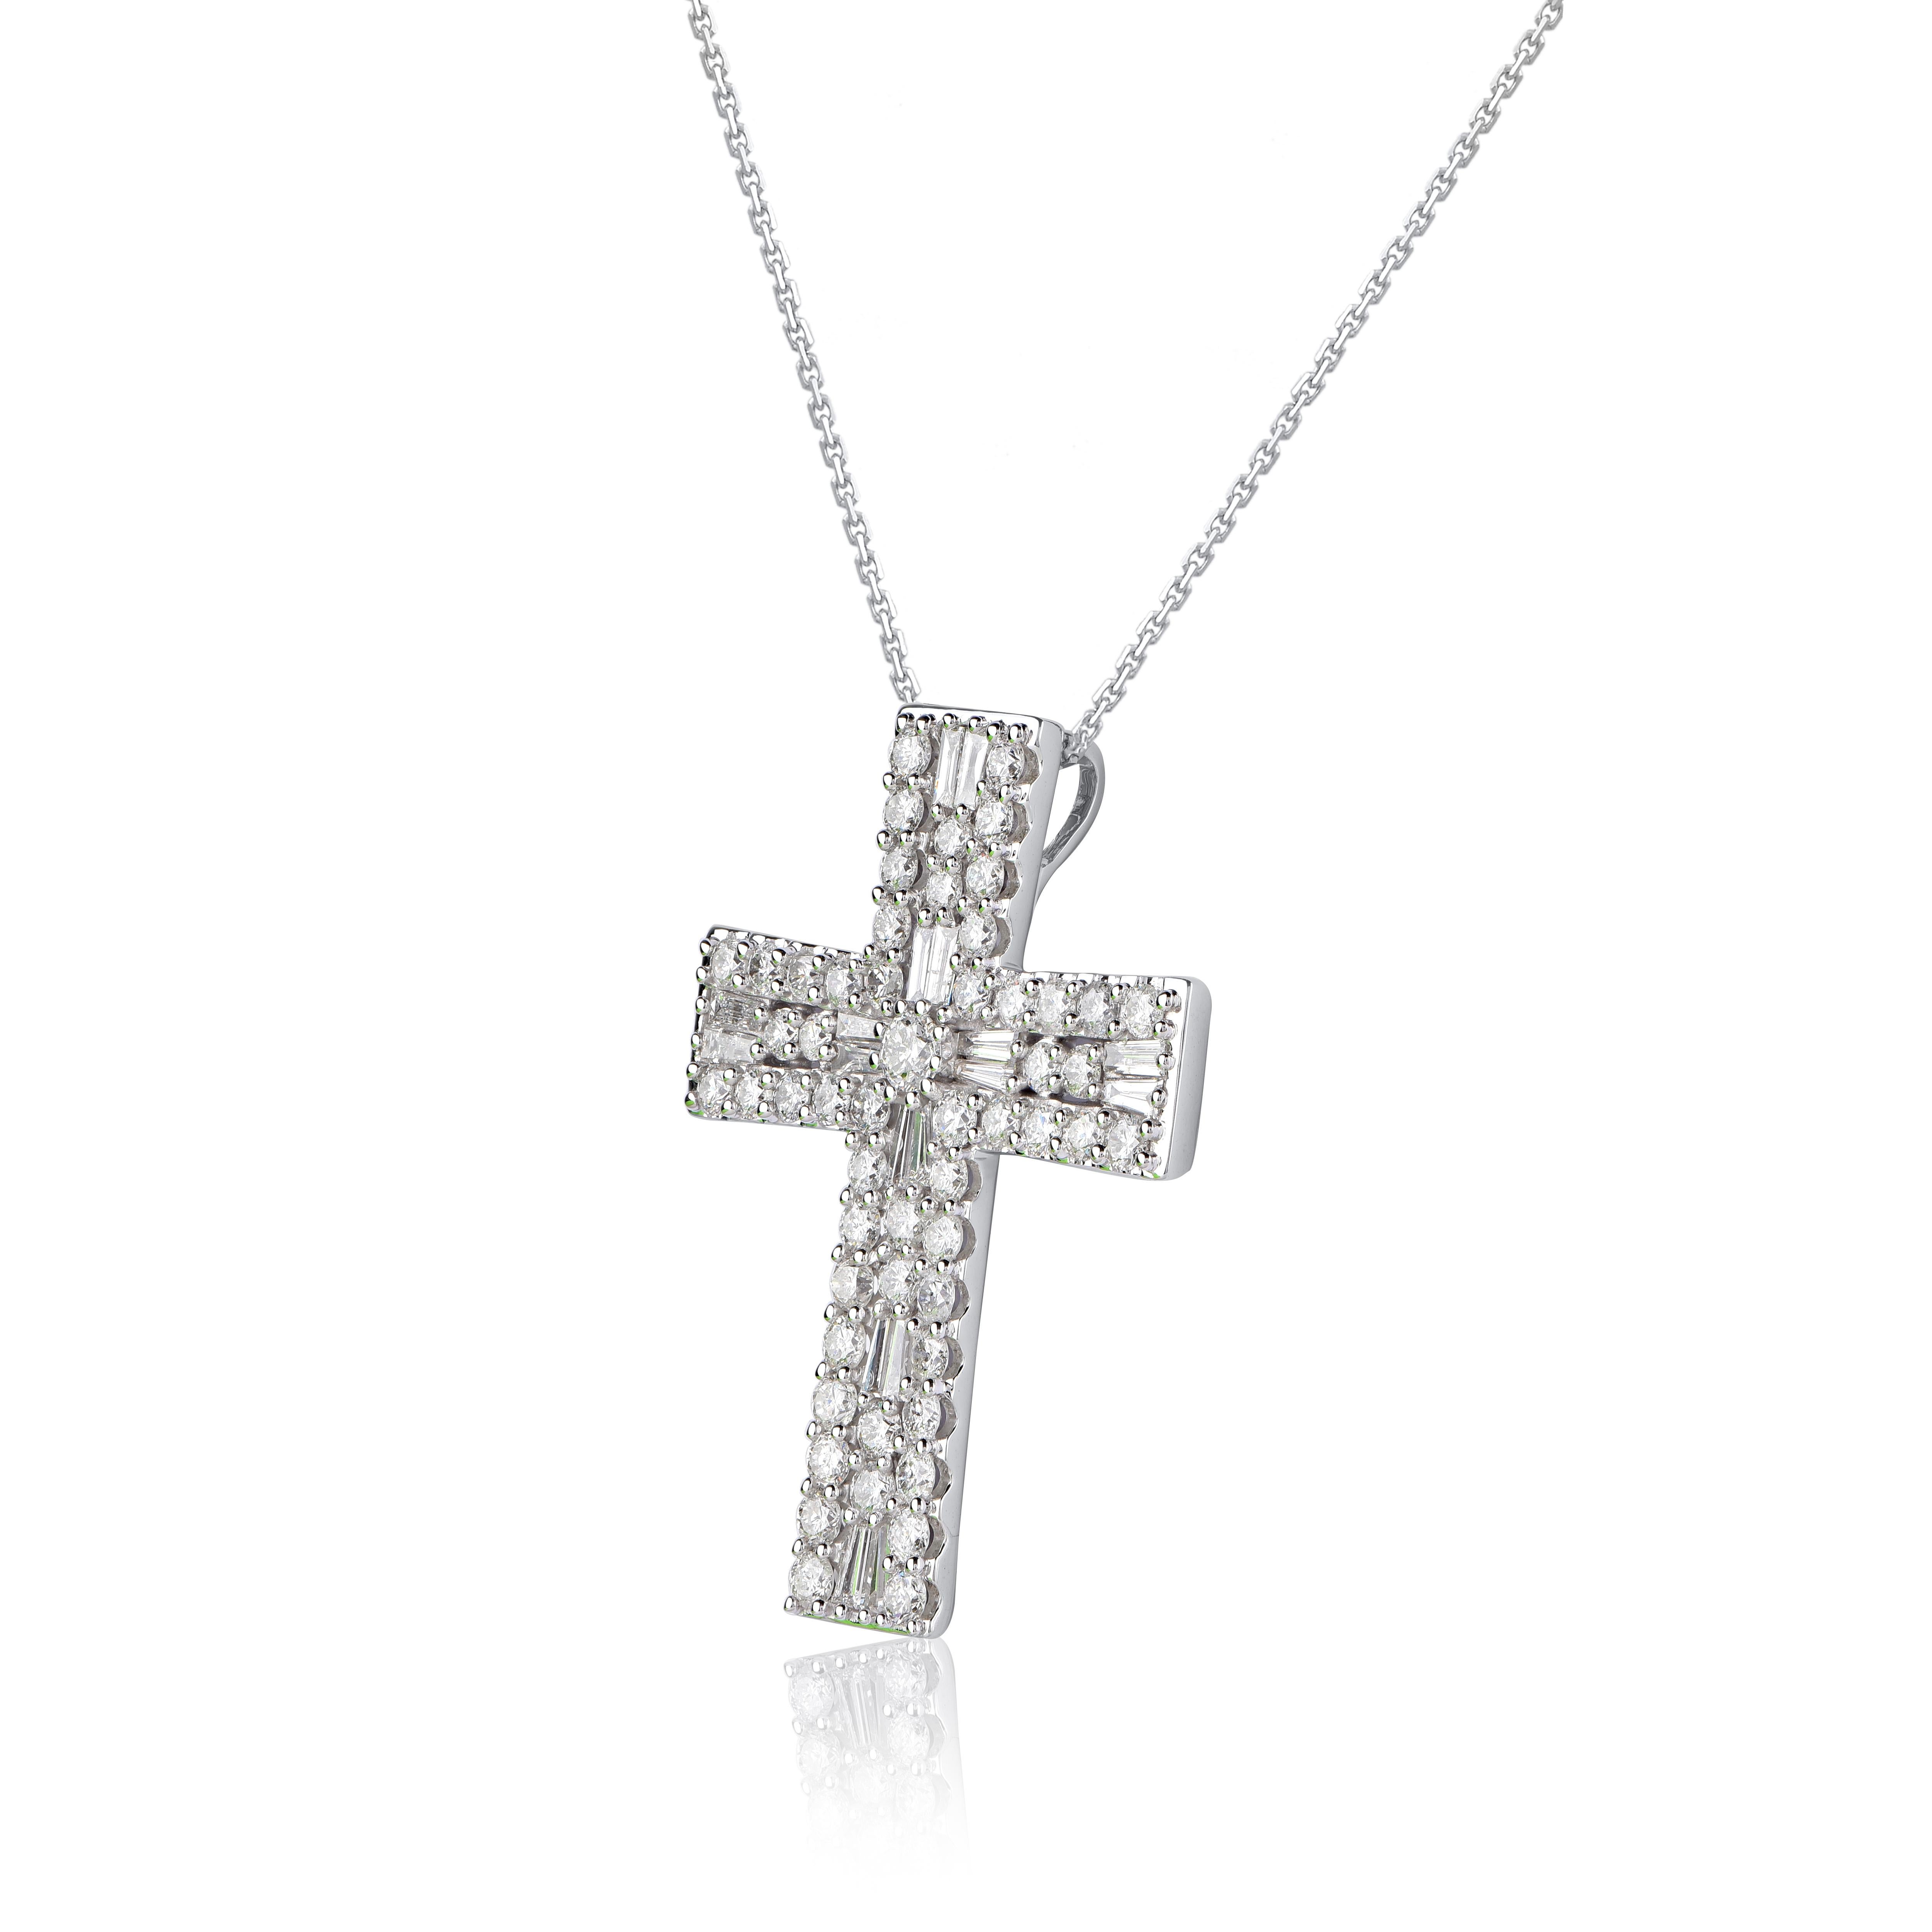 Make a bold statement of style and beliefs with the eye-catching elegance of this diamond cross pendant. Beautifully crafted by our inhouse experts in 14 karat white gold and embellished with 73 round brilliant cut & baguette cut diamond set in